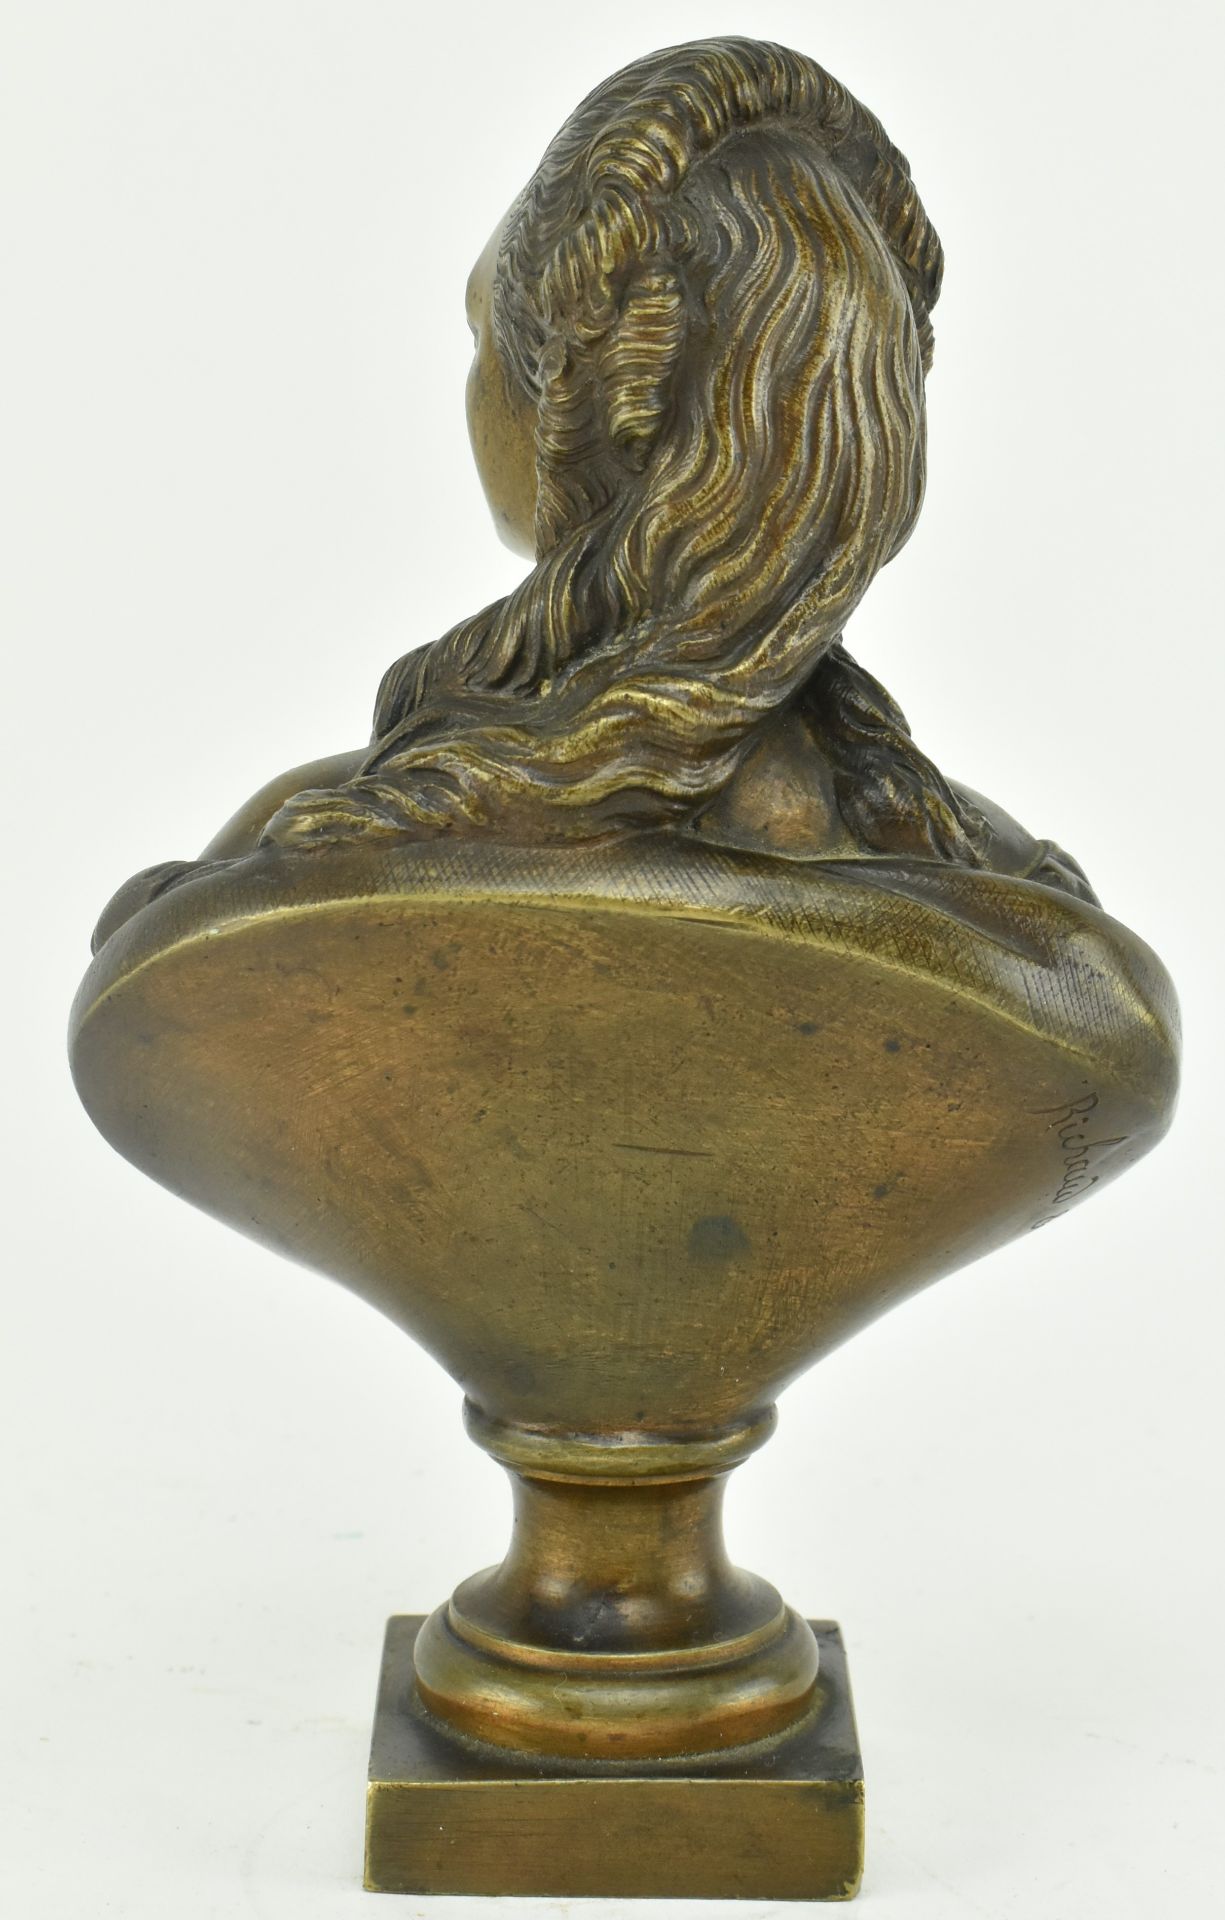 RICHAUD ET CIE - 19TH CENTURY FRENCH BRONZE BUST OF WOMAN - Image 3 of 5